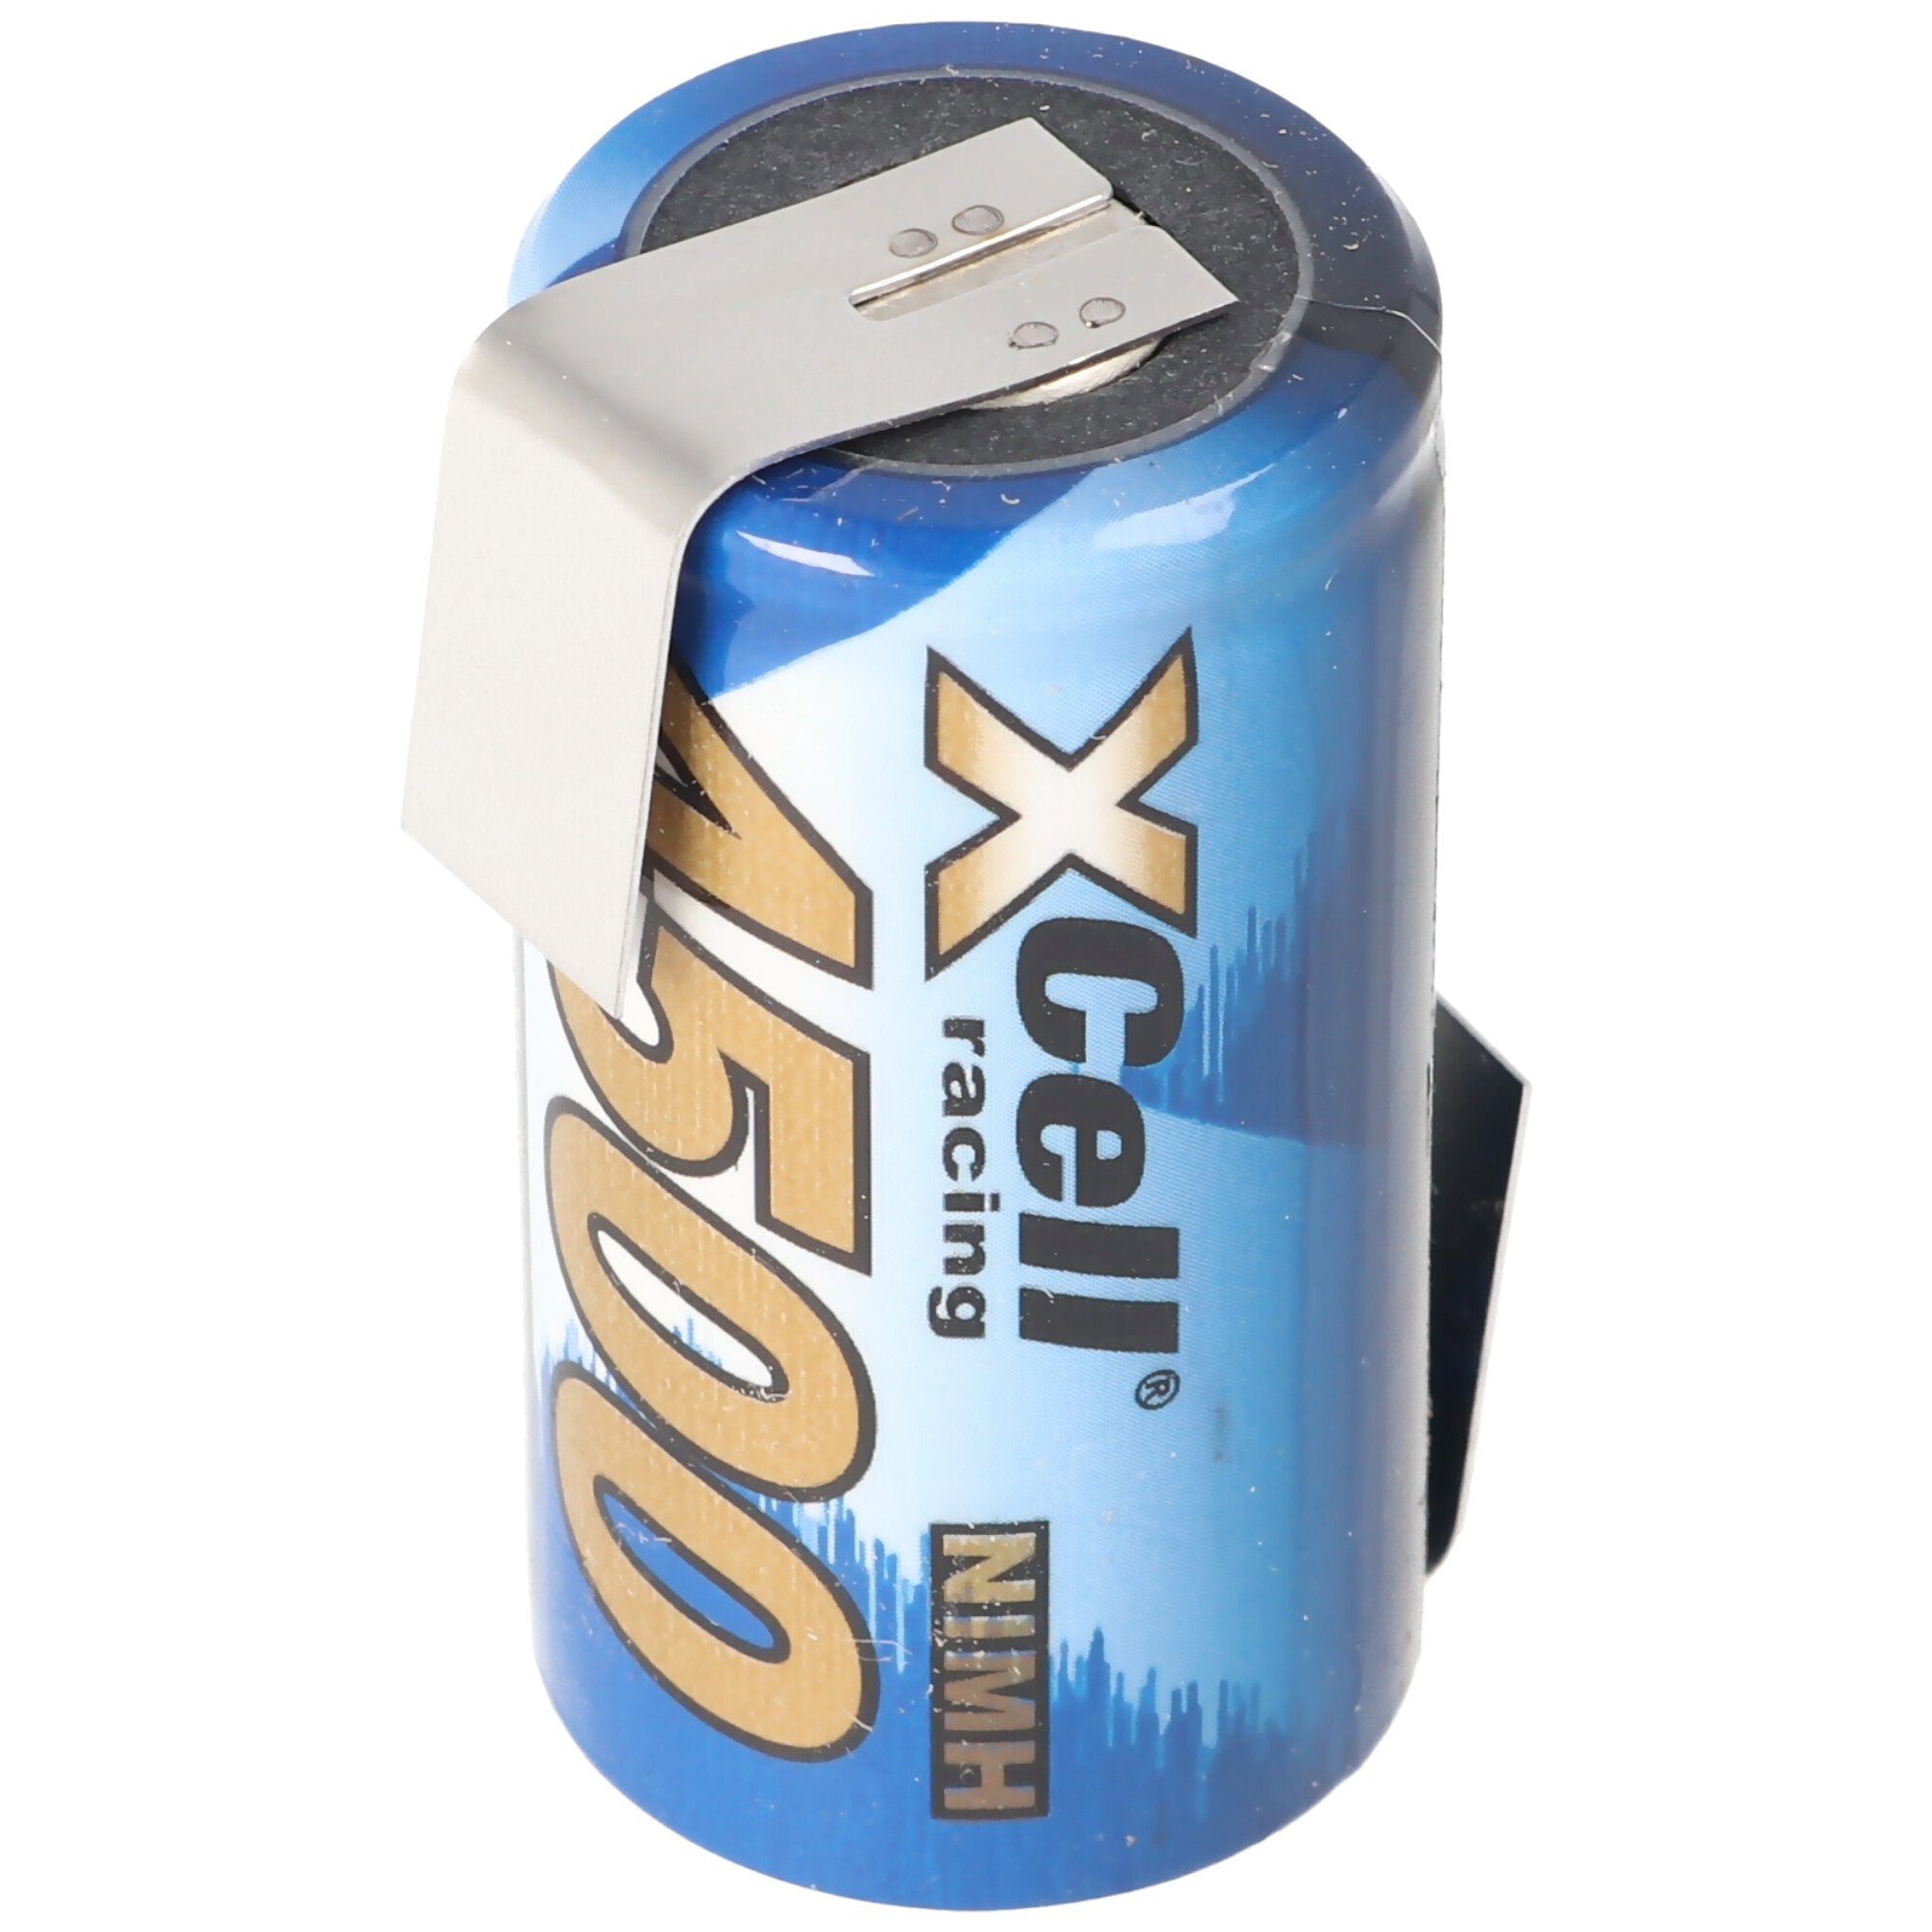 XCell 4500mAh Sub-C Ni-MH battery with Z-shaped solder tab